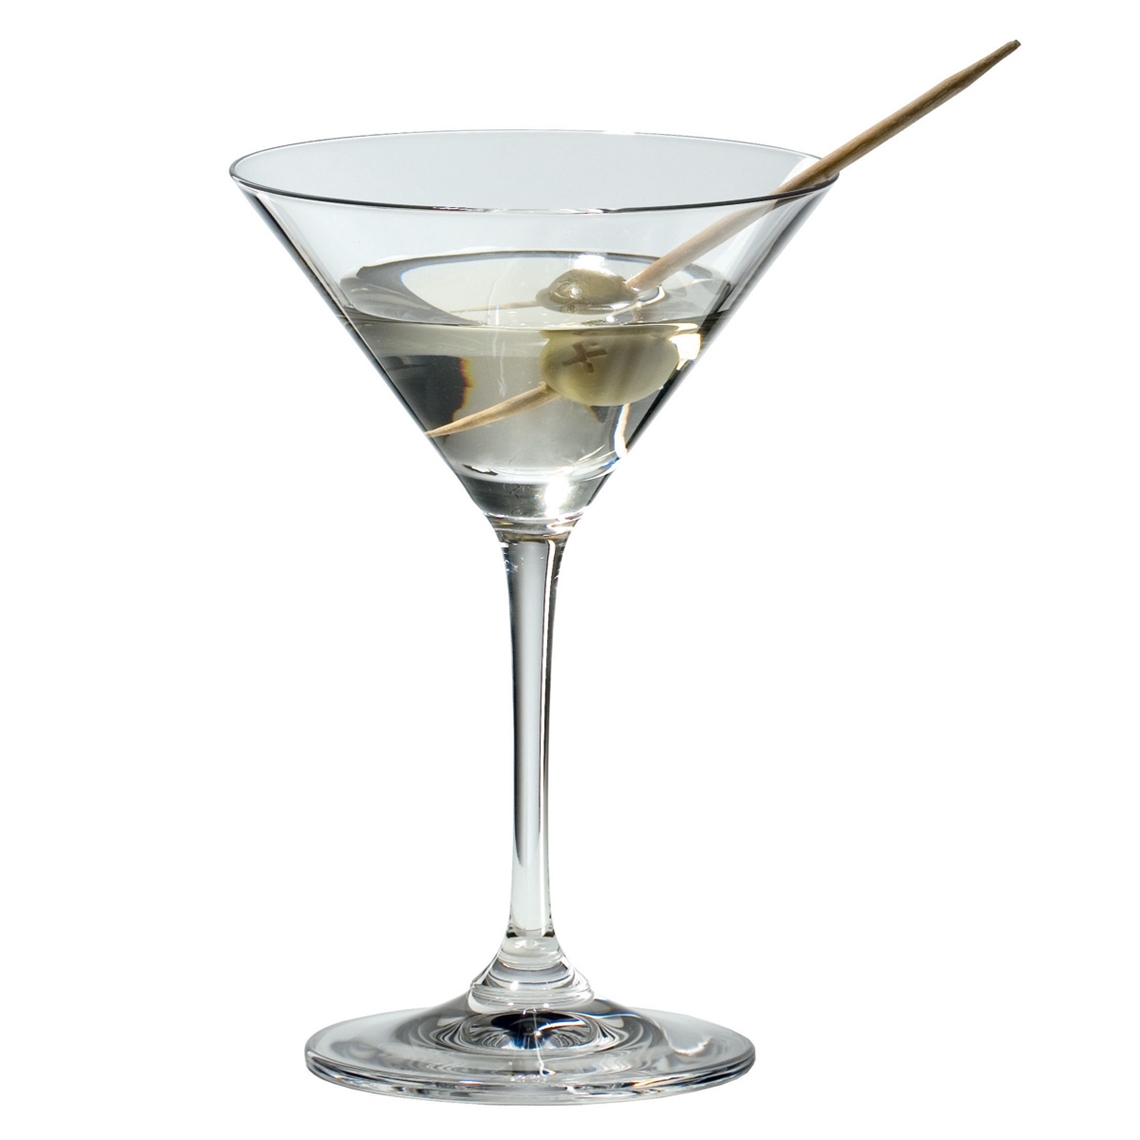 View more sydonios from our Martini Glasses range